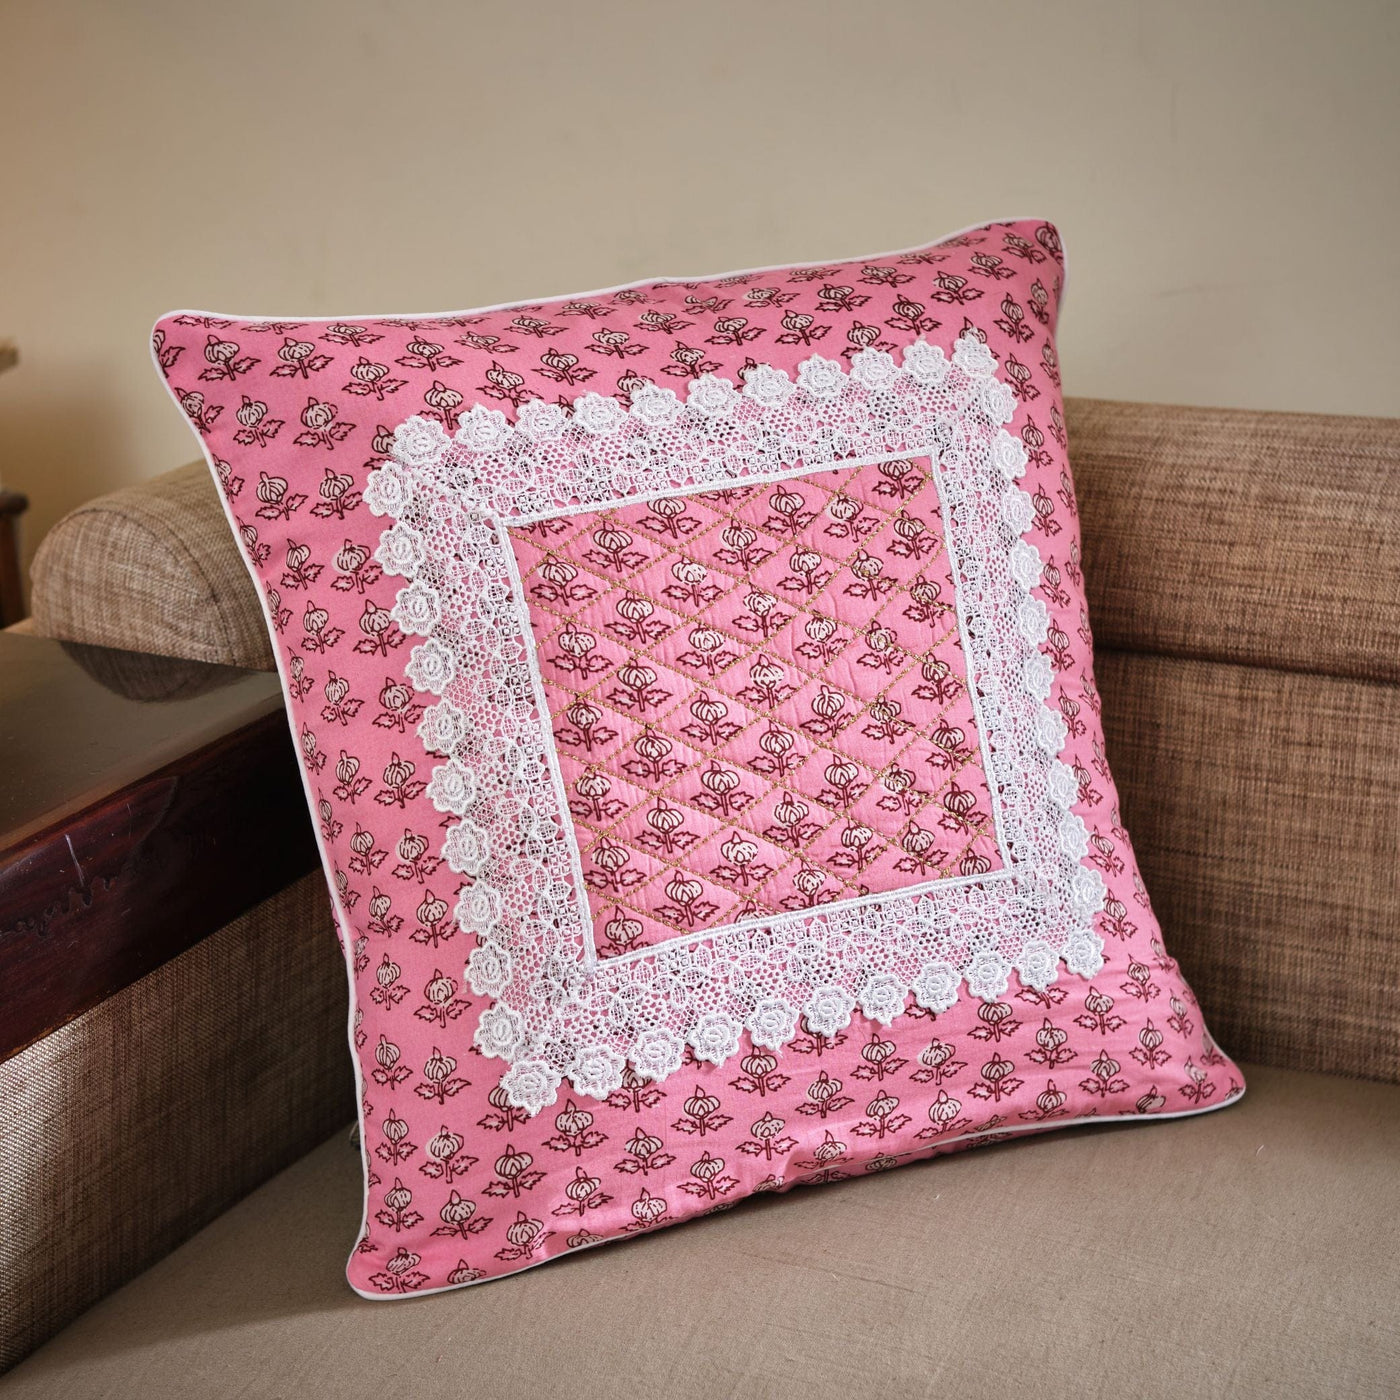 The Fabricrush  Pillowcases & Shams Lace Quilted Pink Pillow Cushion Cover